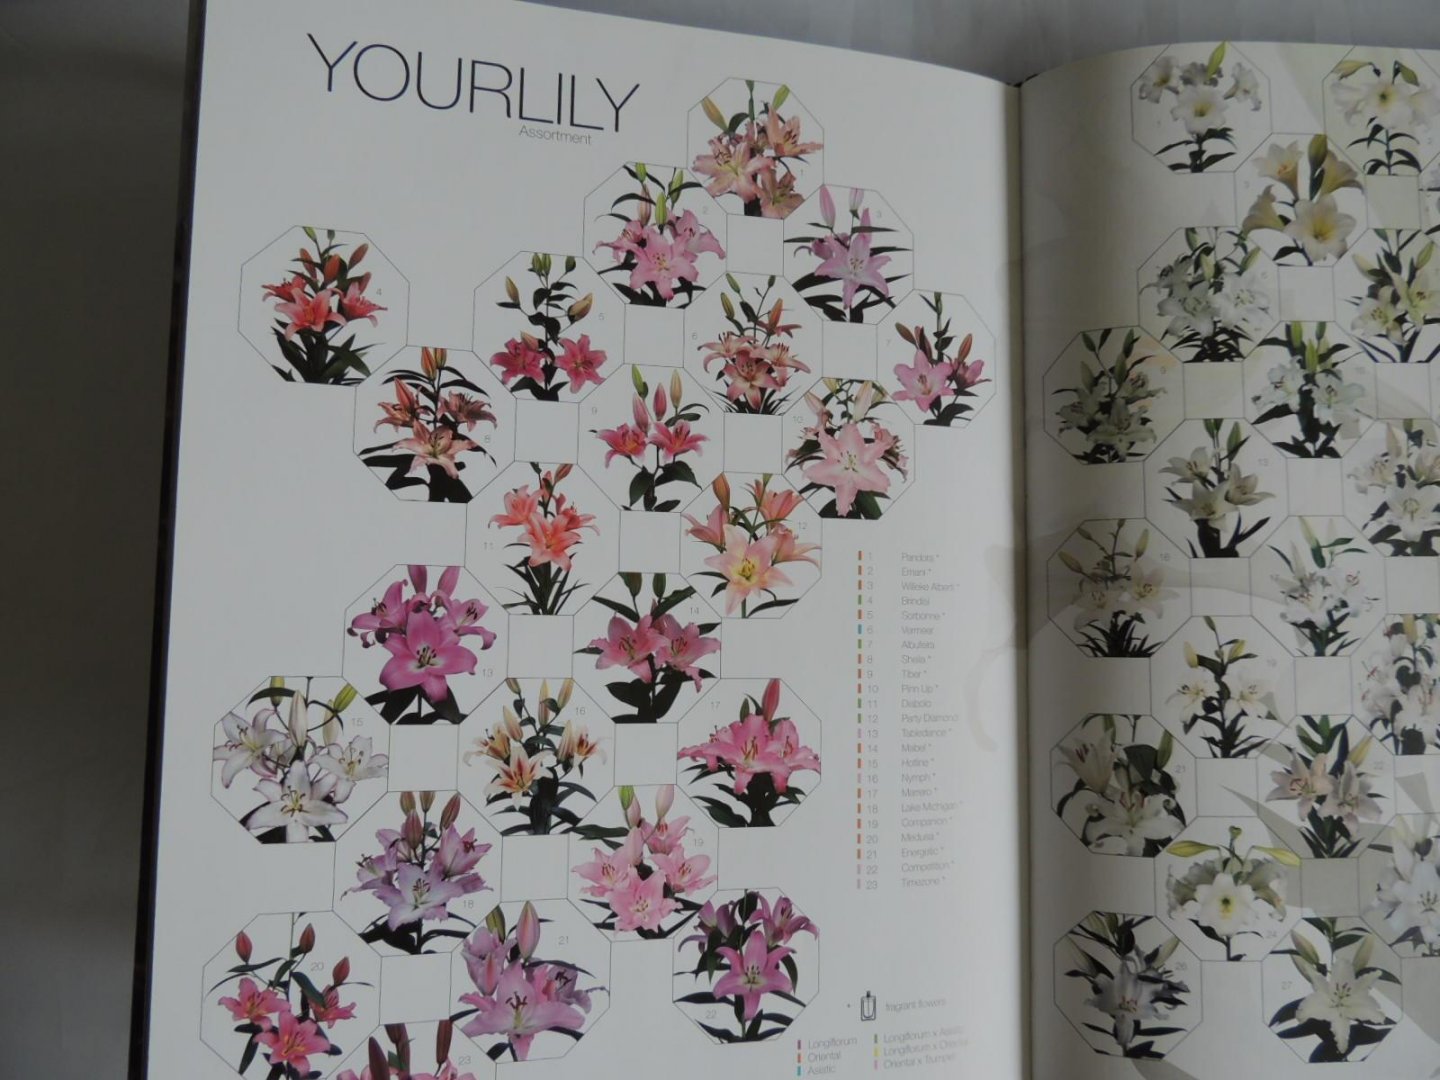 YOUR LILY TEAM - YOURLILY full of inspirations and pure authentic nature = prachtig fotoboek